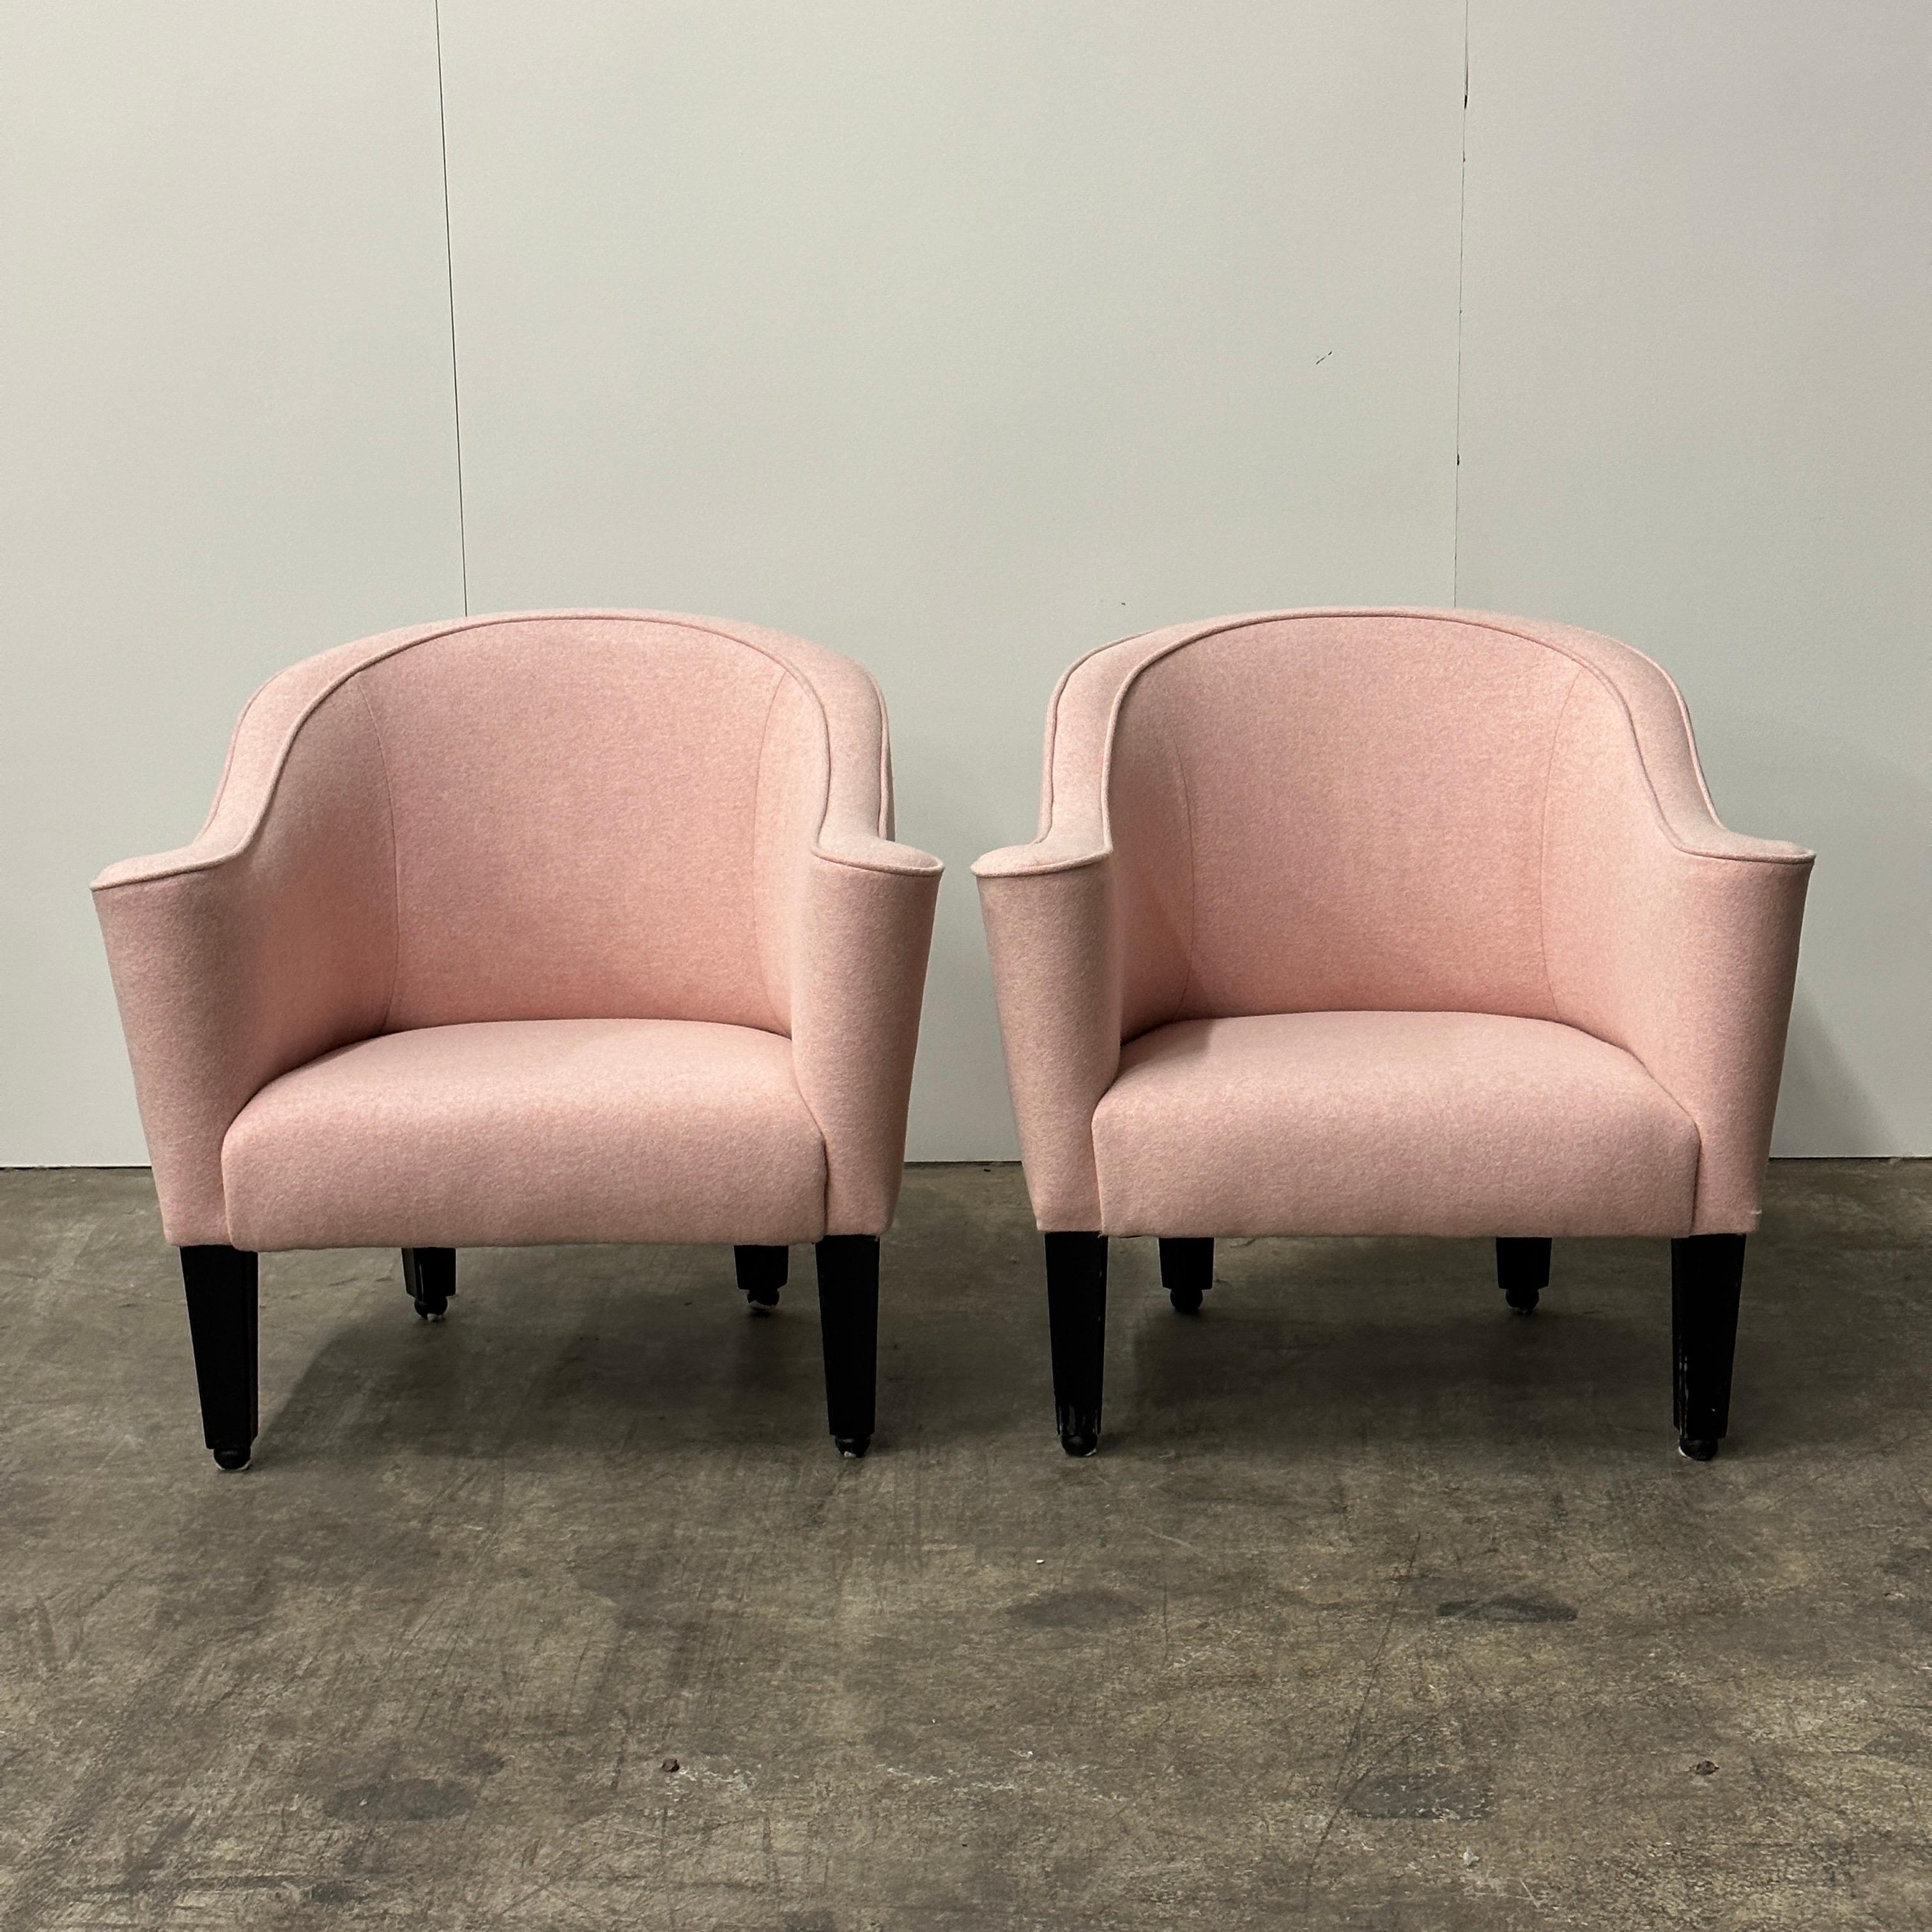 c. Mid 20th Century. Price is for the set. Contact us if you’d like to purchase a single item. Reupholstered in pink felt Kvadrat fabric. Tagged. 